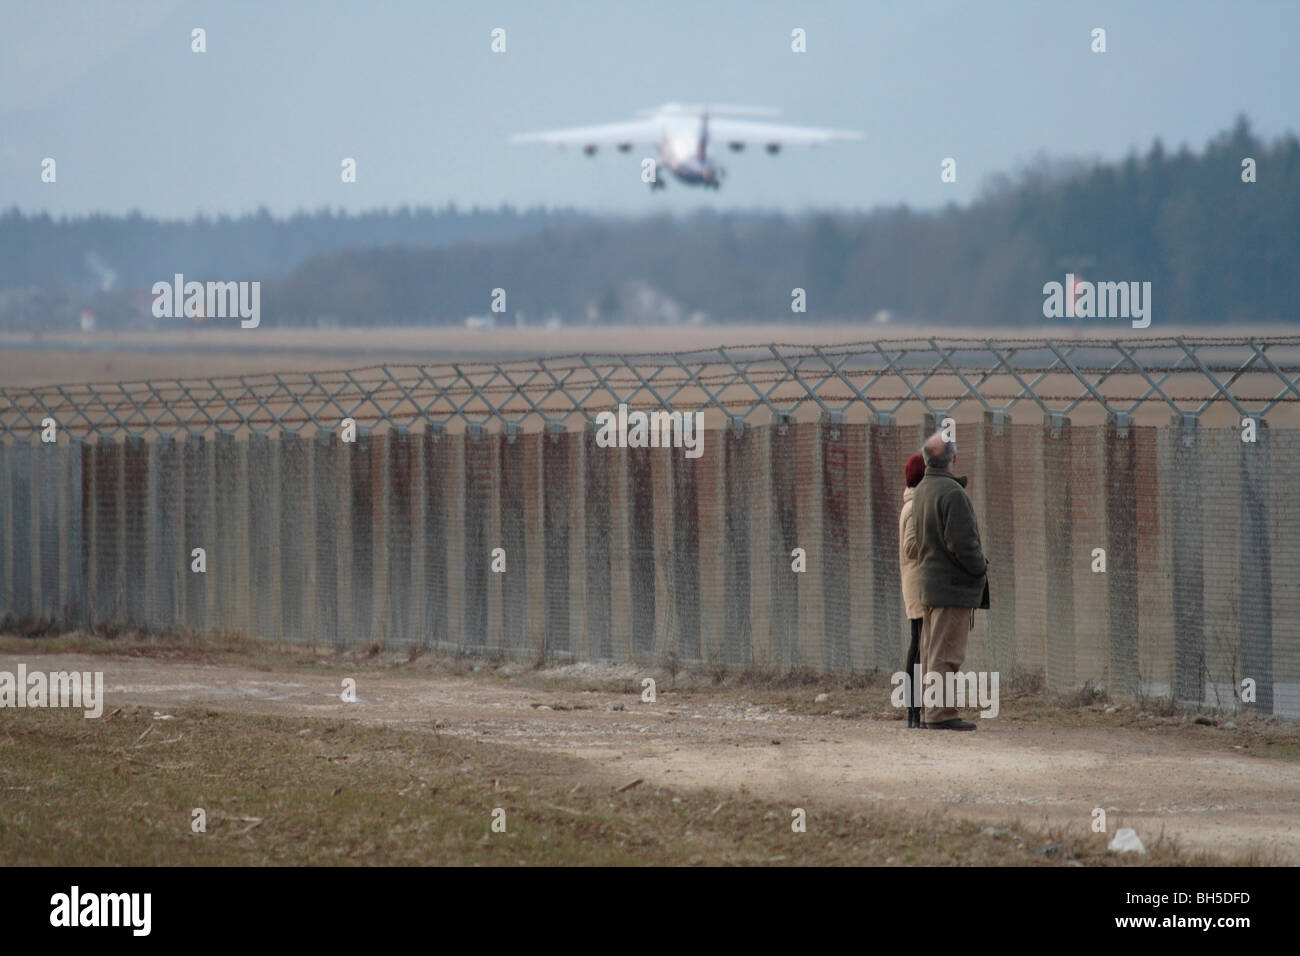 Walkers outside the perimeter fence at Ljubljana Airport watching an aircraft taking off. Air traffic and aviation. Stock Photo